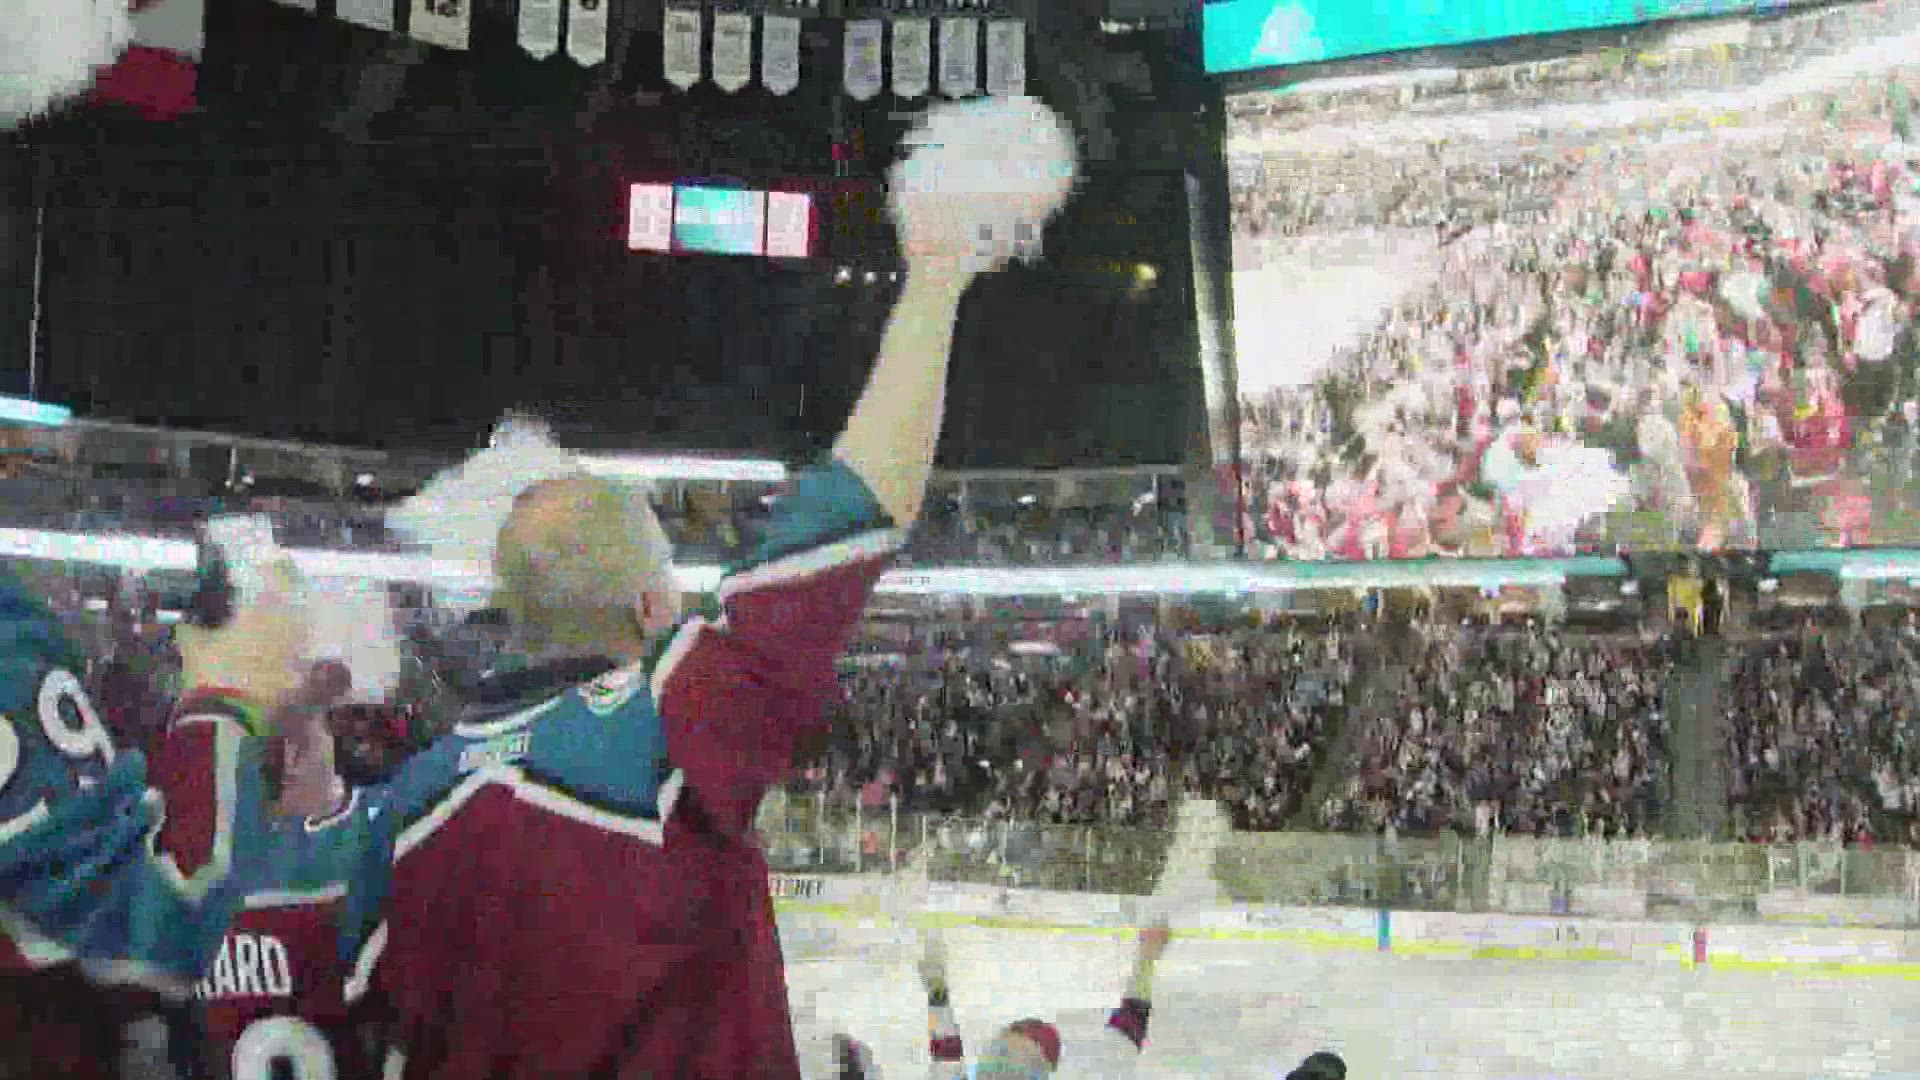 Monday's Game 4 was more than 1,000 miles away in Edmonton, but Avalanche fans from around Colorado still packed Ball Arena for a watch party.